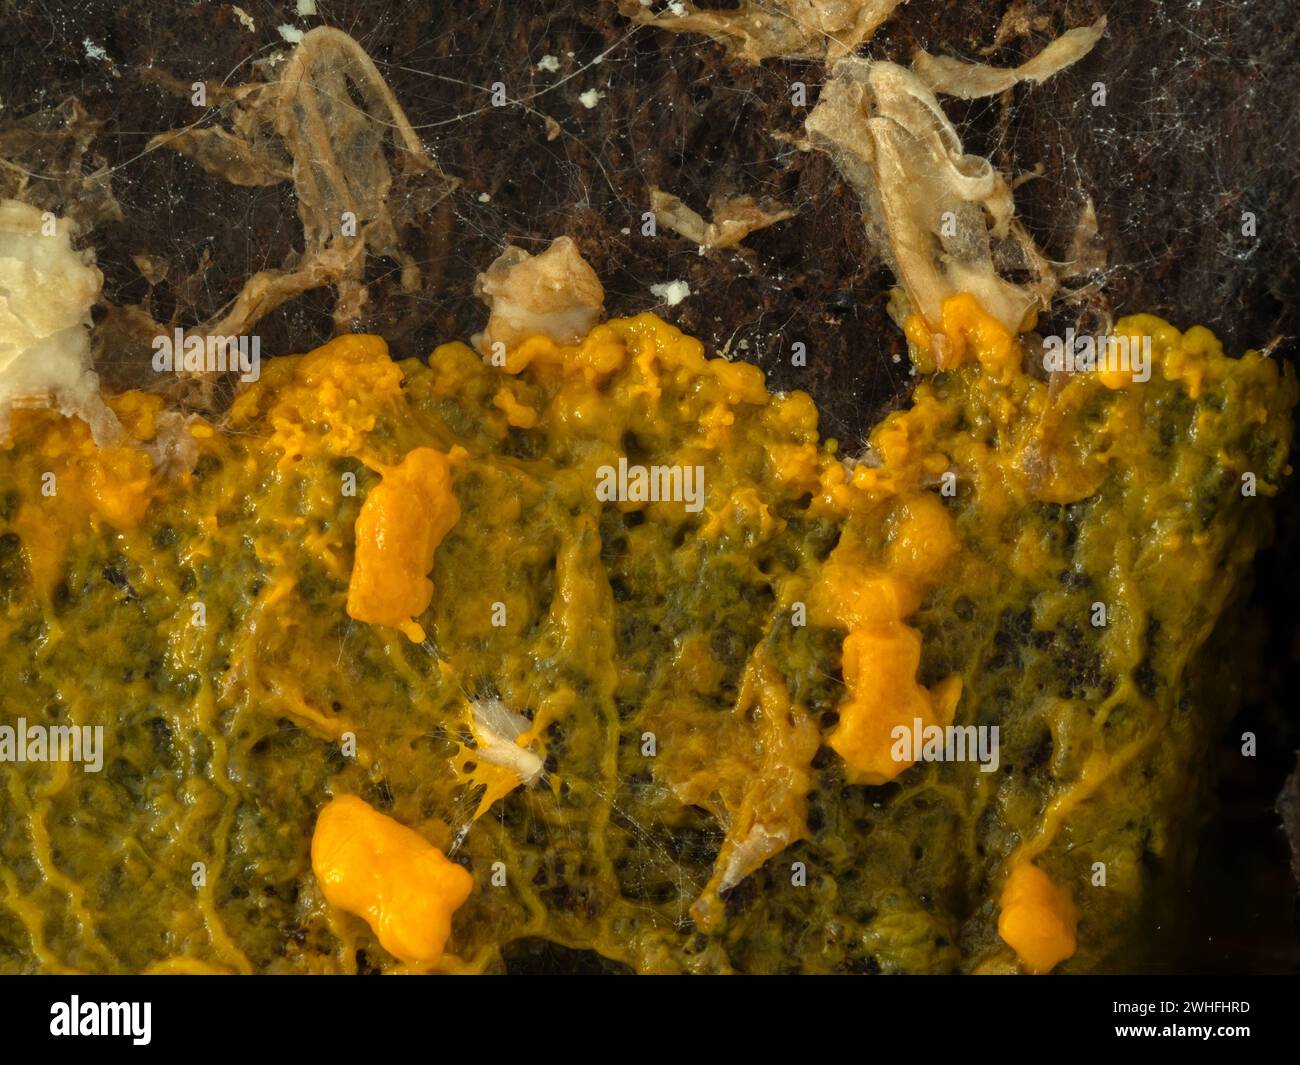 the orange-colored plasmodium of a slime mold (Badhamia utricularis) slowly speading over and feeding on rolled oats Stock Photo